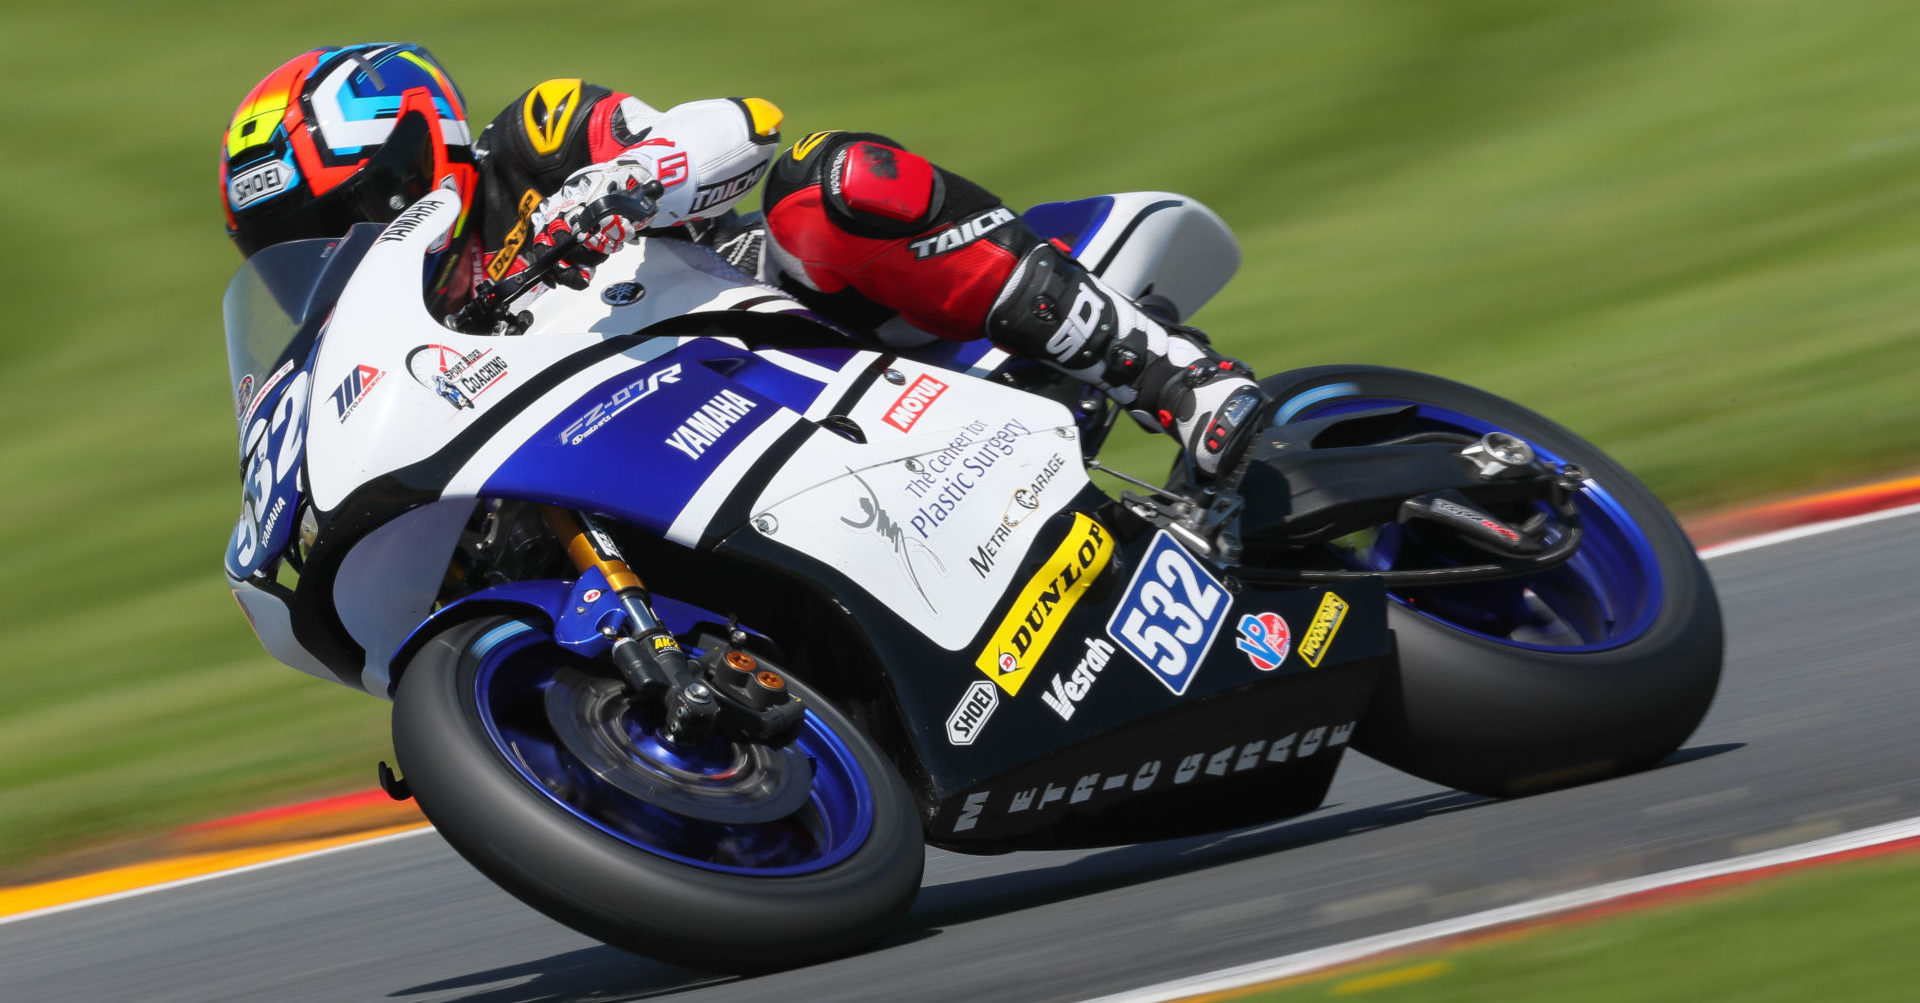 Dr. Carl Price (532) in action during the 2019 MotoAmerica Twins Cup finale at Barber Motorsports Park. Photo by Brian J. Nelson, courtesy of Robem Engineering.